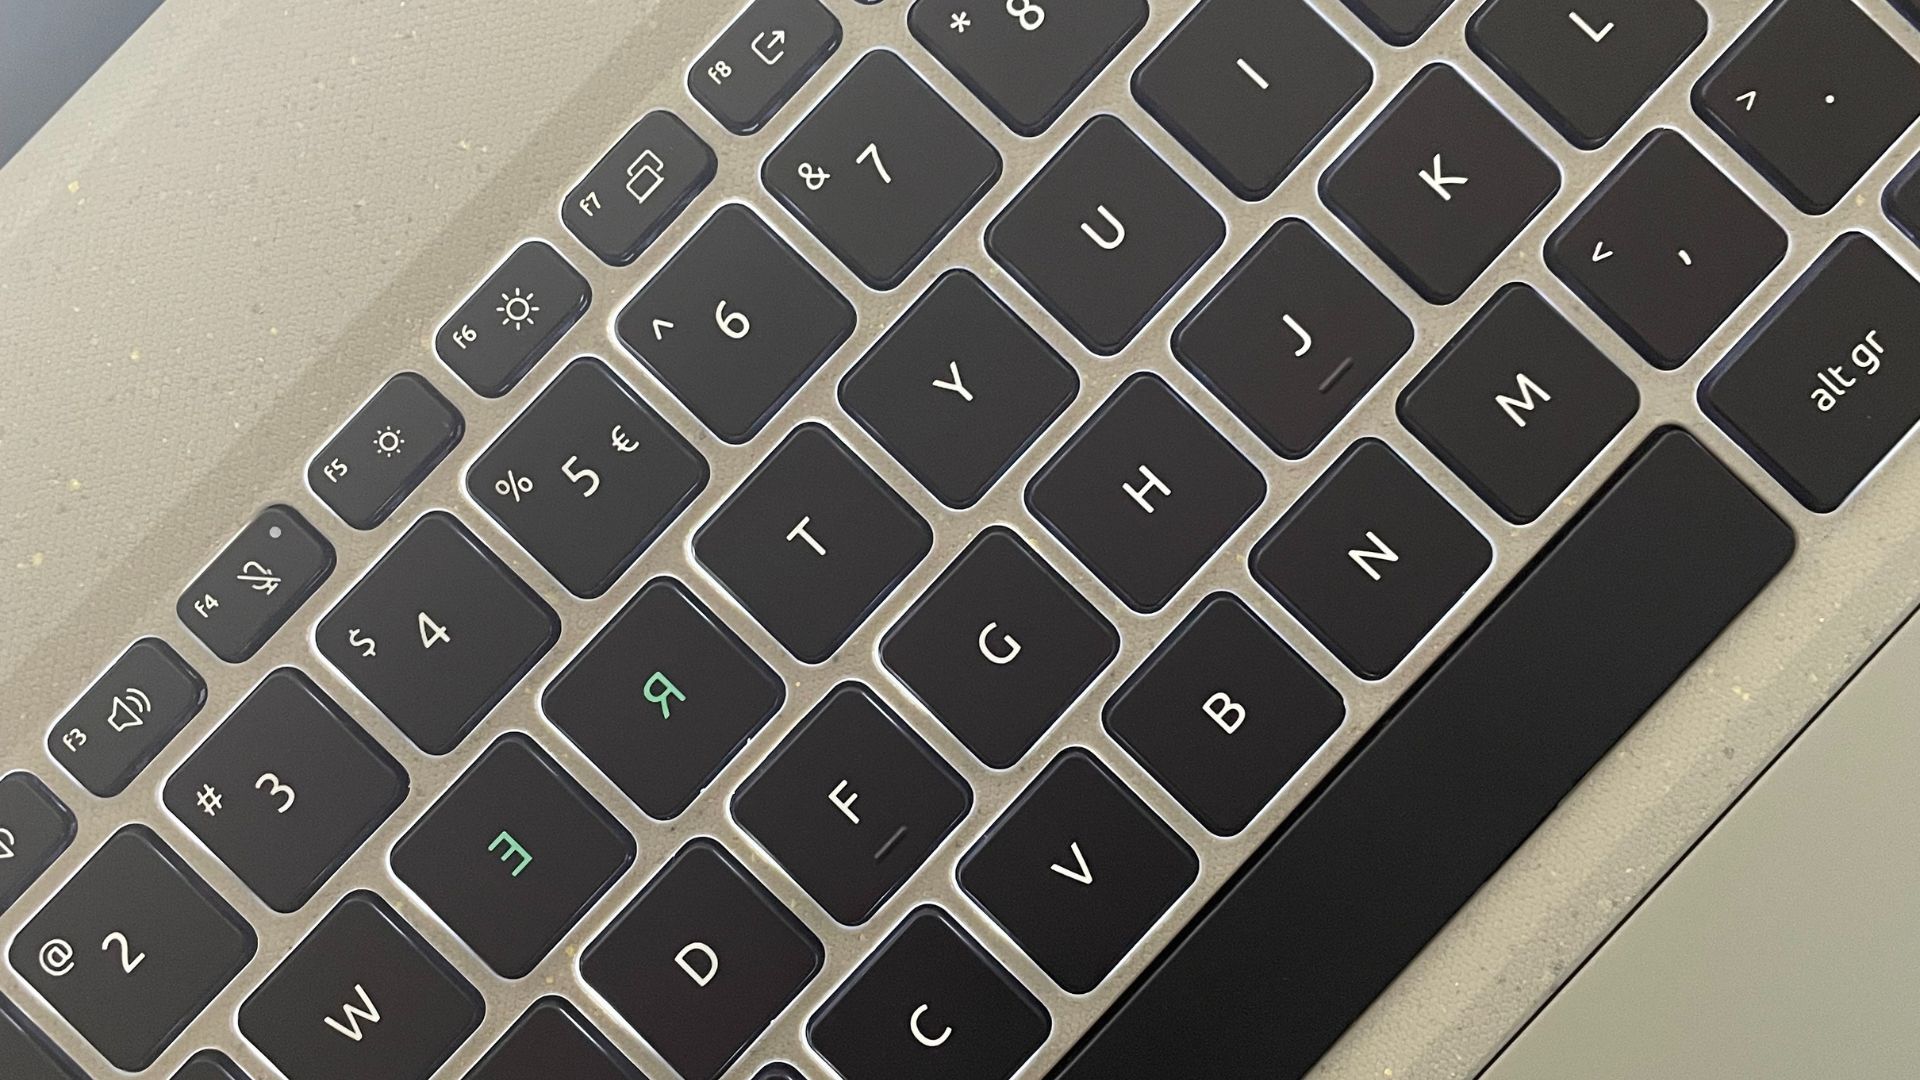 acer aspire vero 15 review - an image of the reversed and colored r and e keys on the keyboard